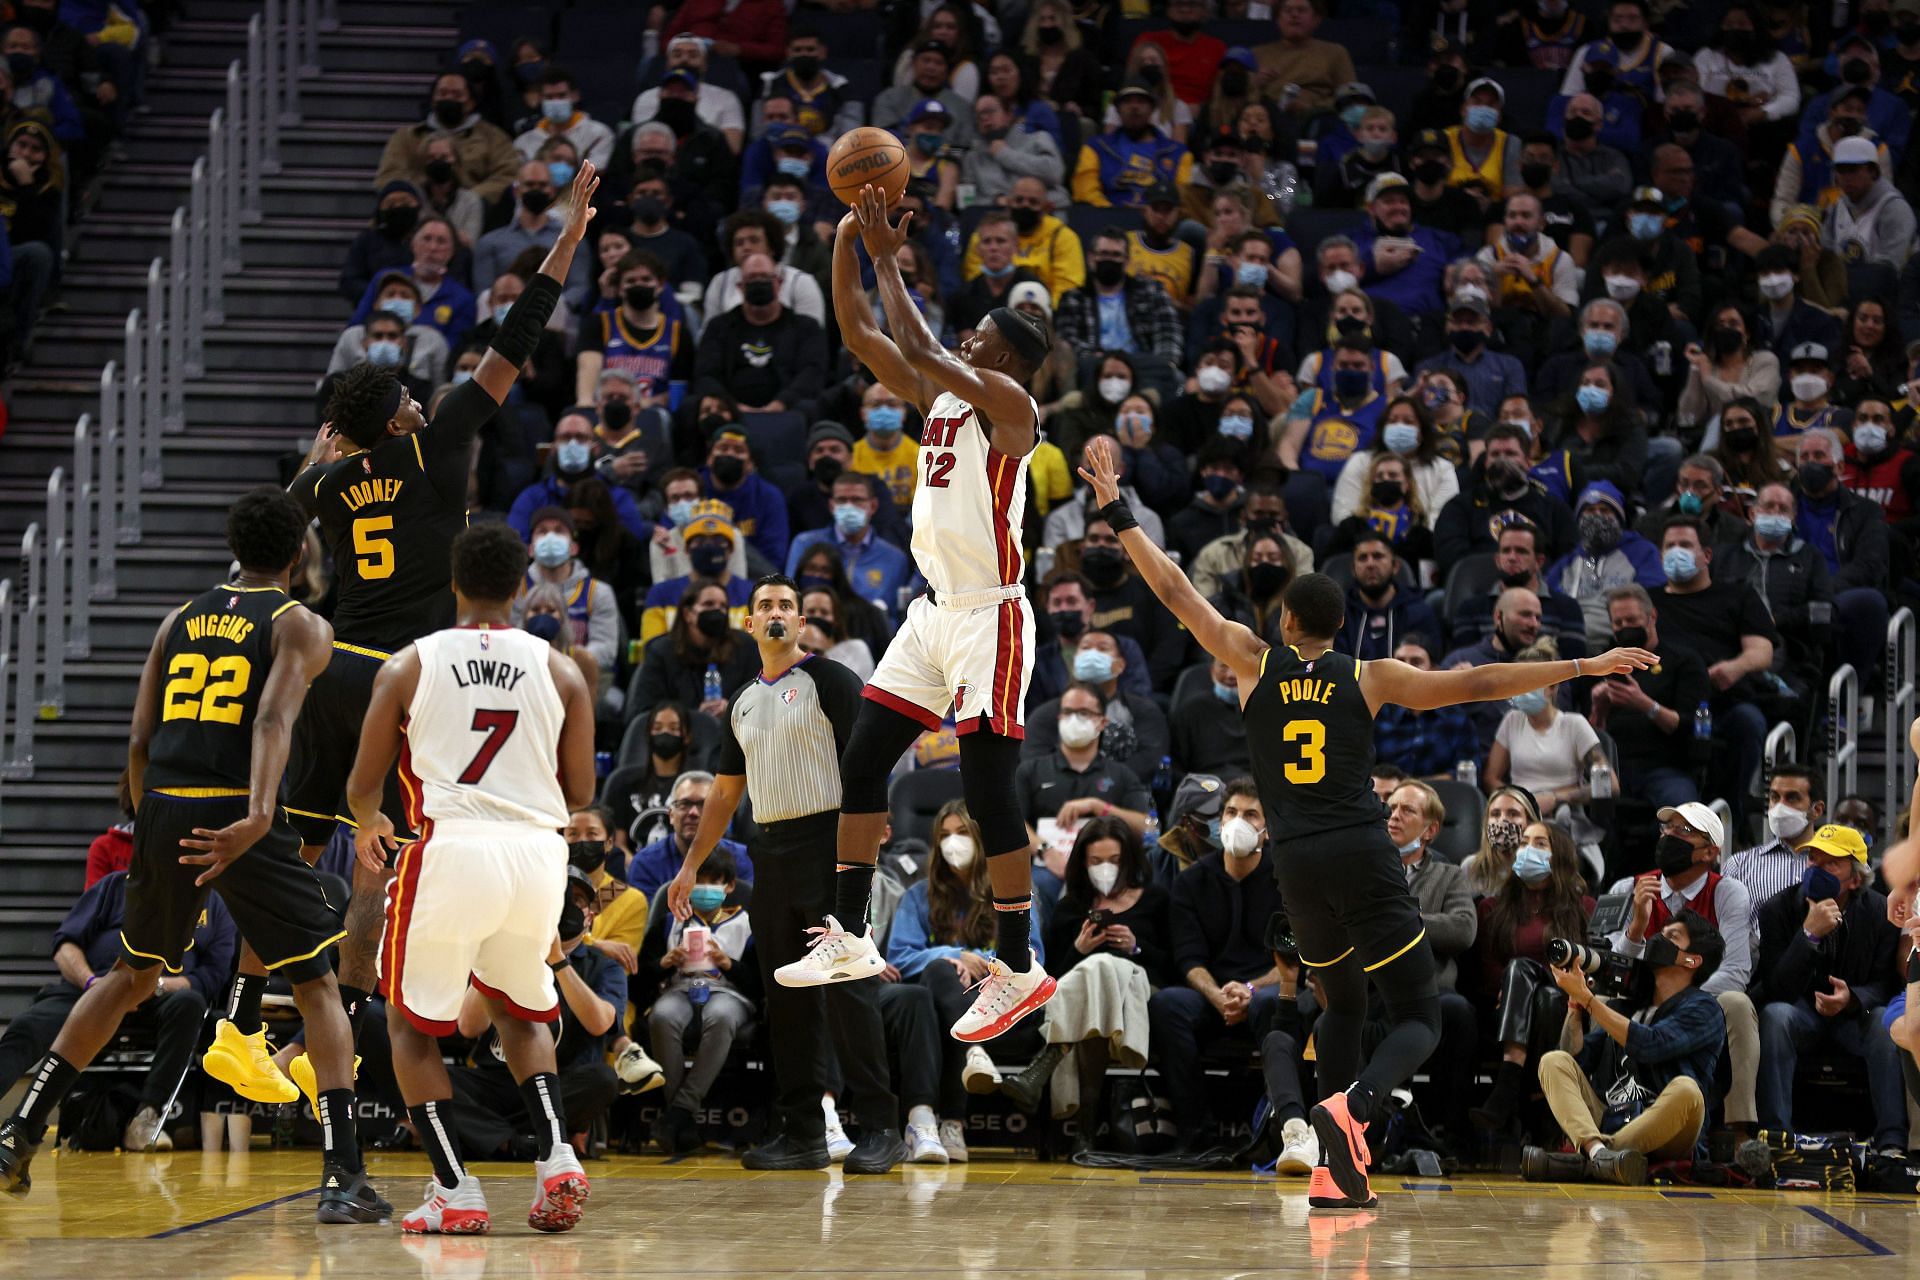 The Miami Heat will host the Golden State Warriors on March 23rd